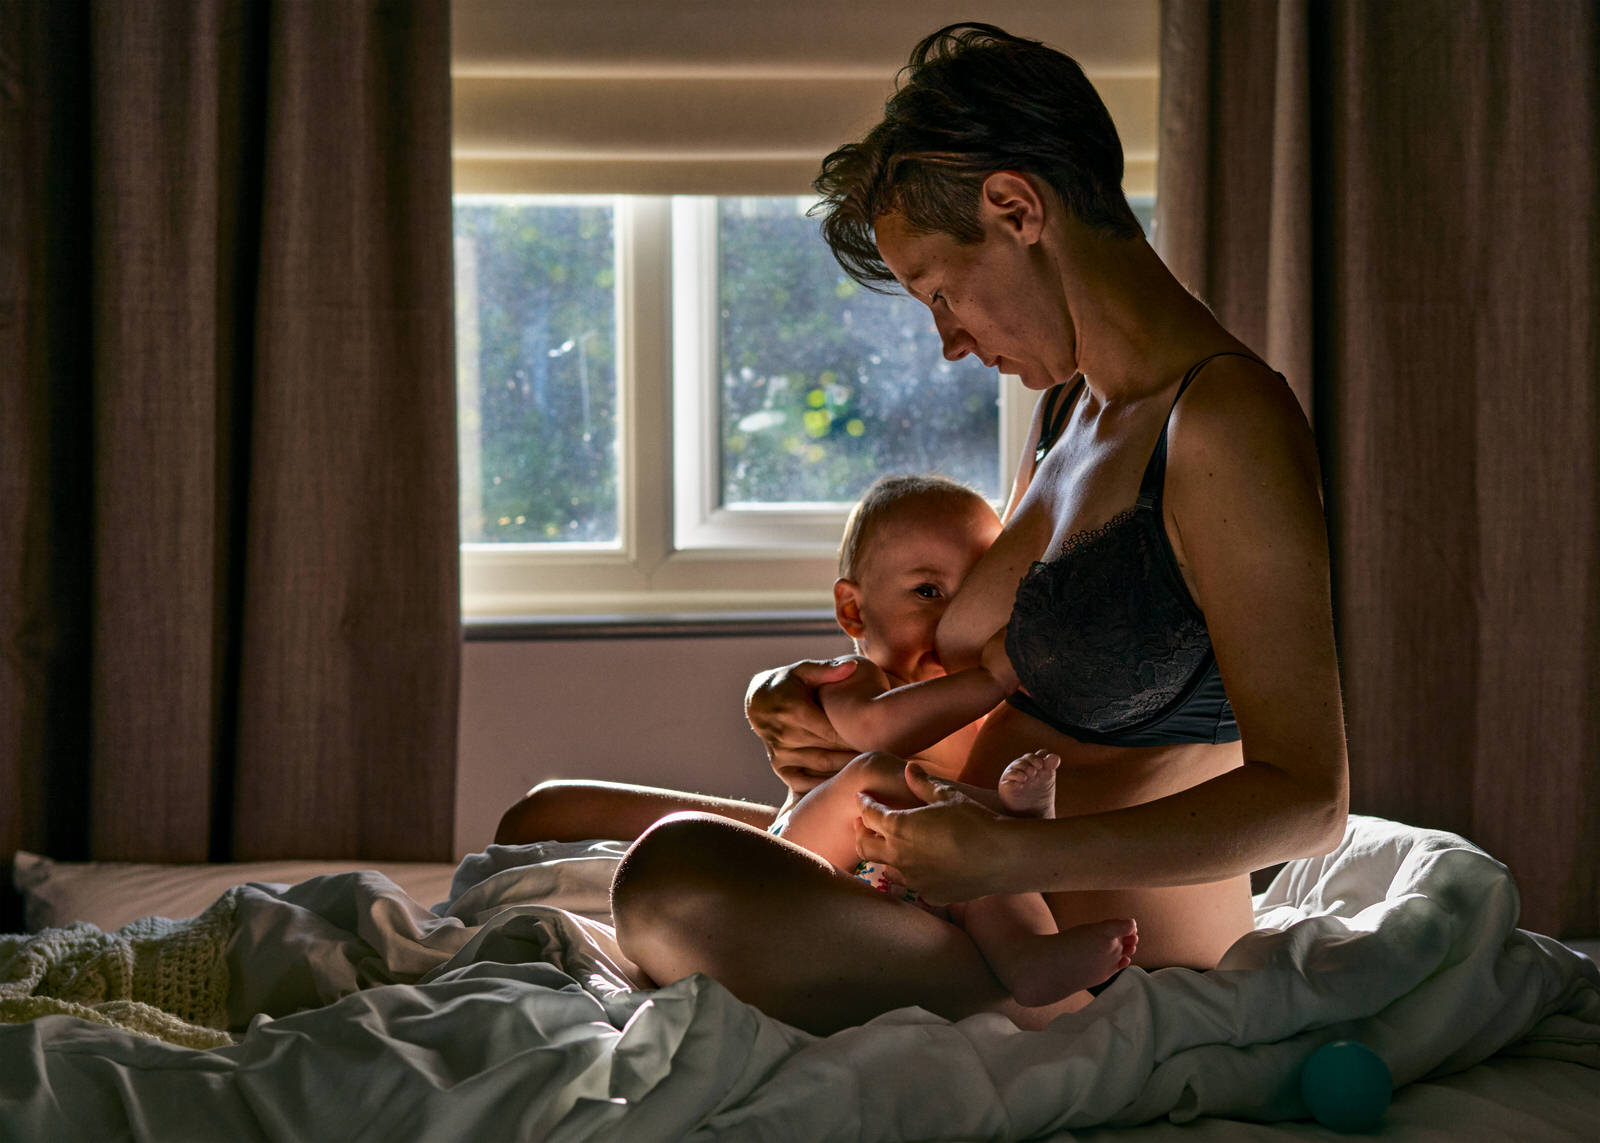 breastfeeding self portrait photo of a mother on a bed with baby